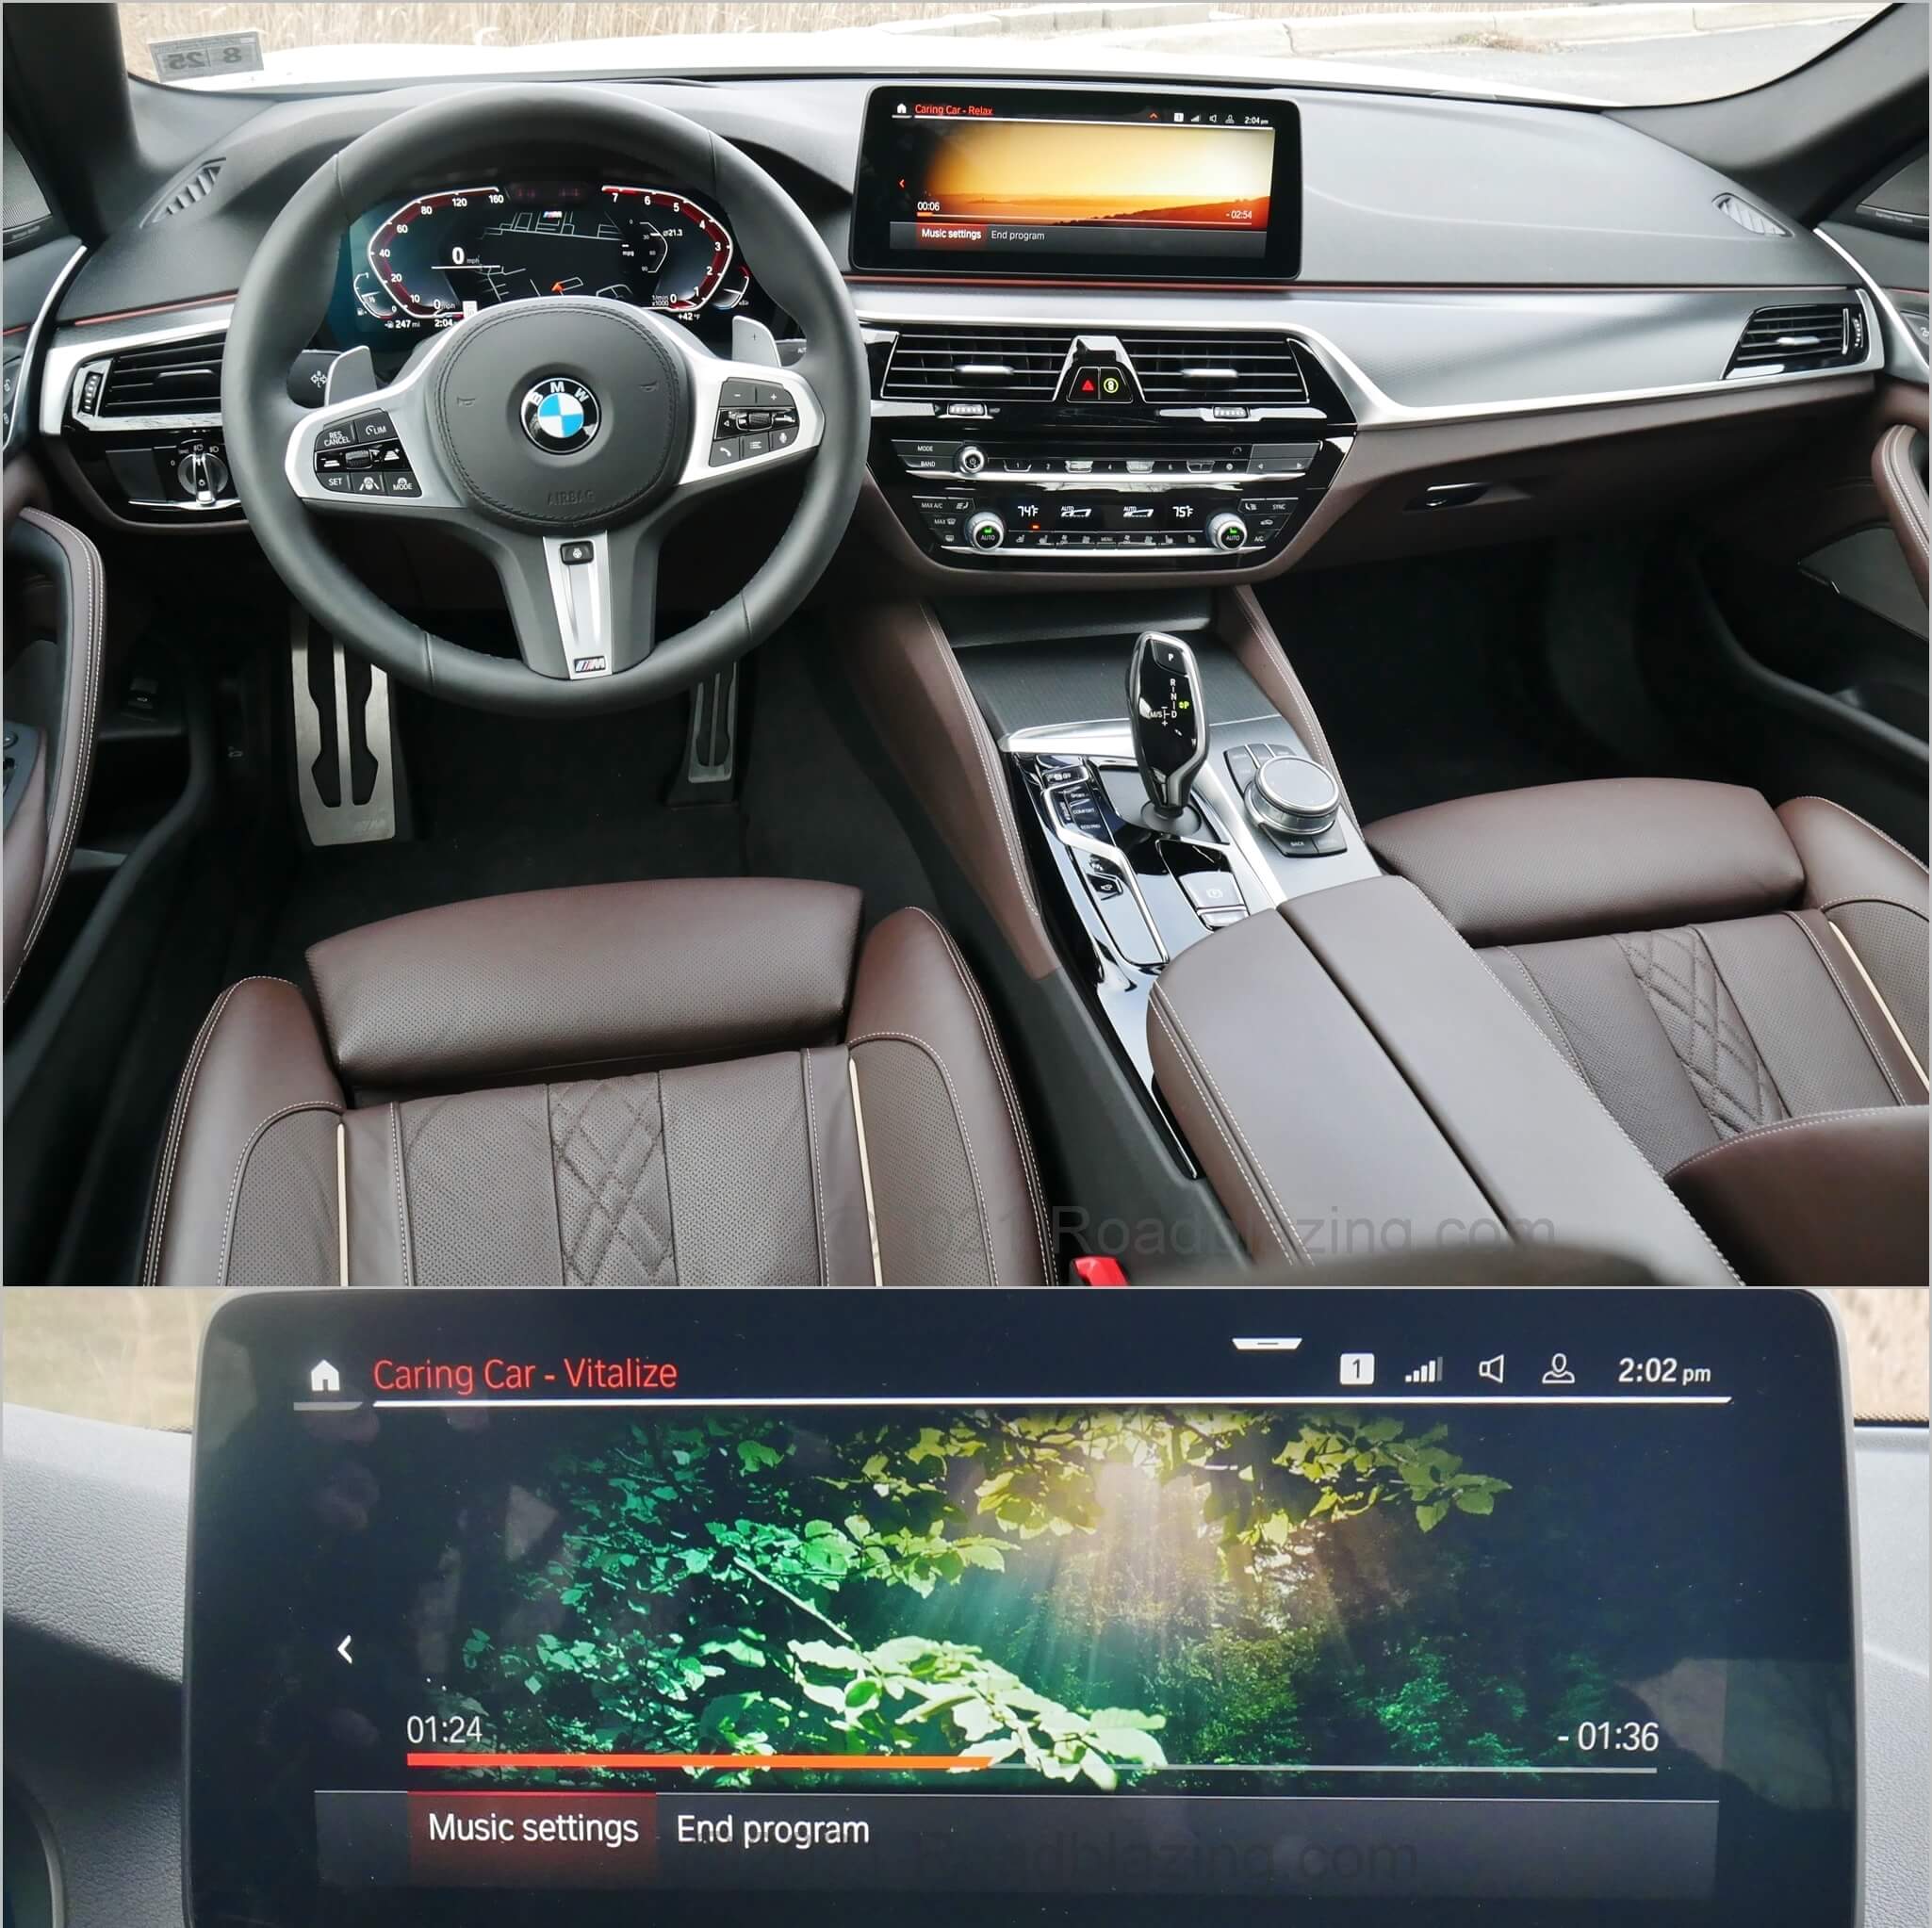 2021 BMW 540i xDrive: selectable vitalizing or relaxing Caring Car cabin mood lighting, music and climate modes